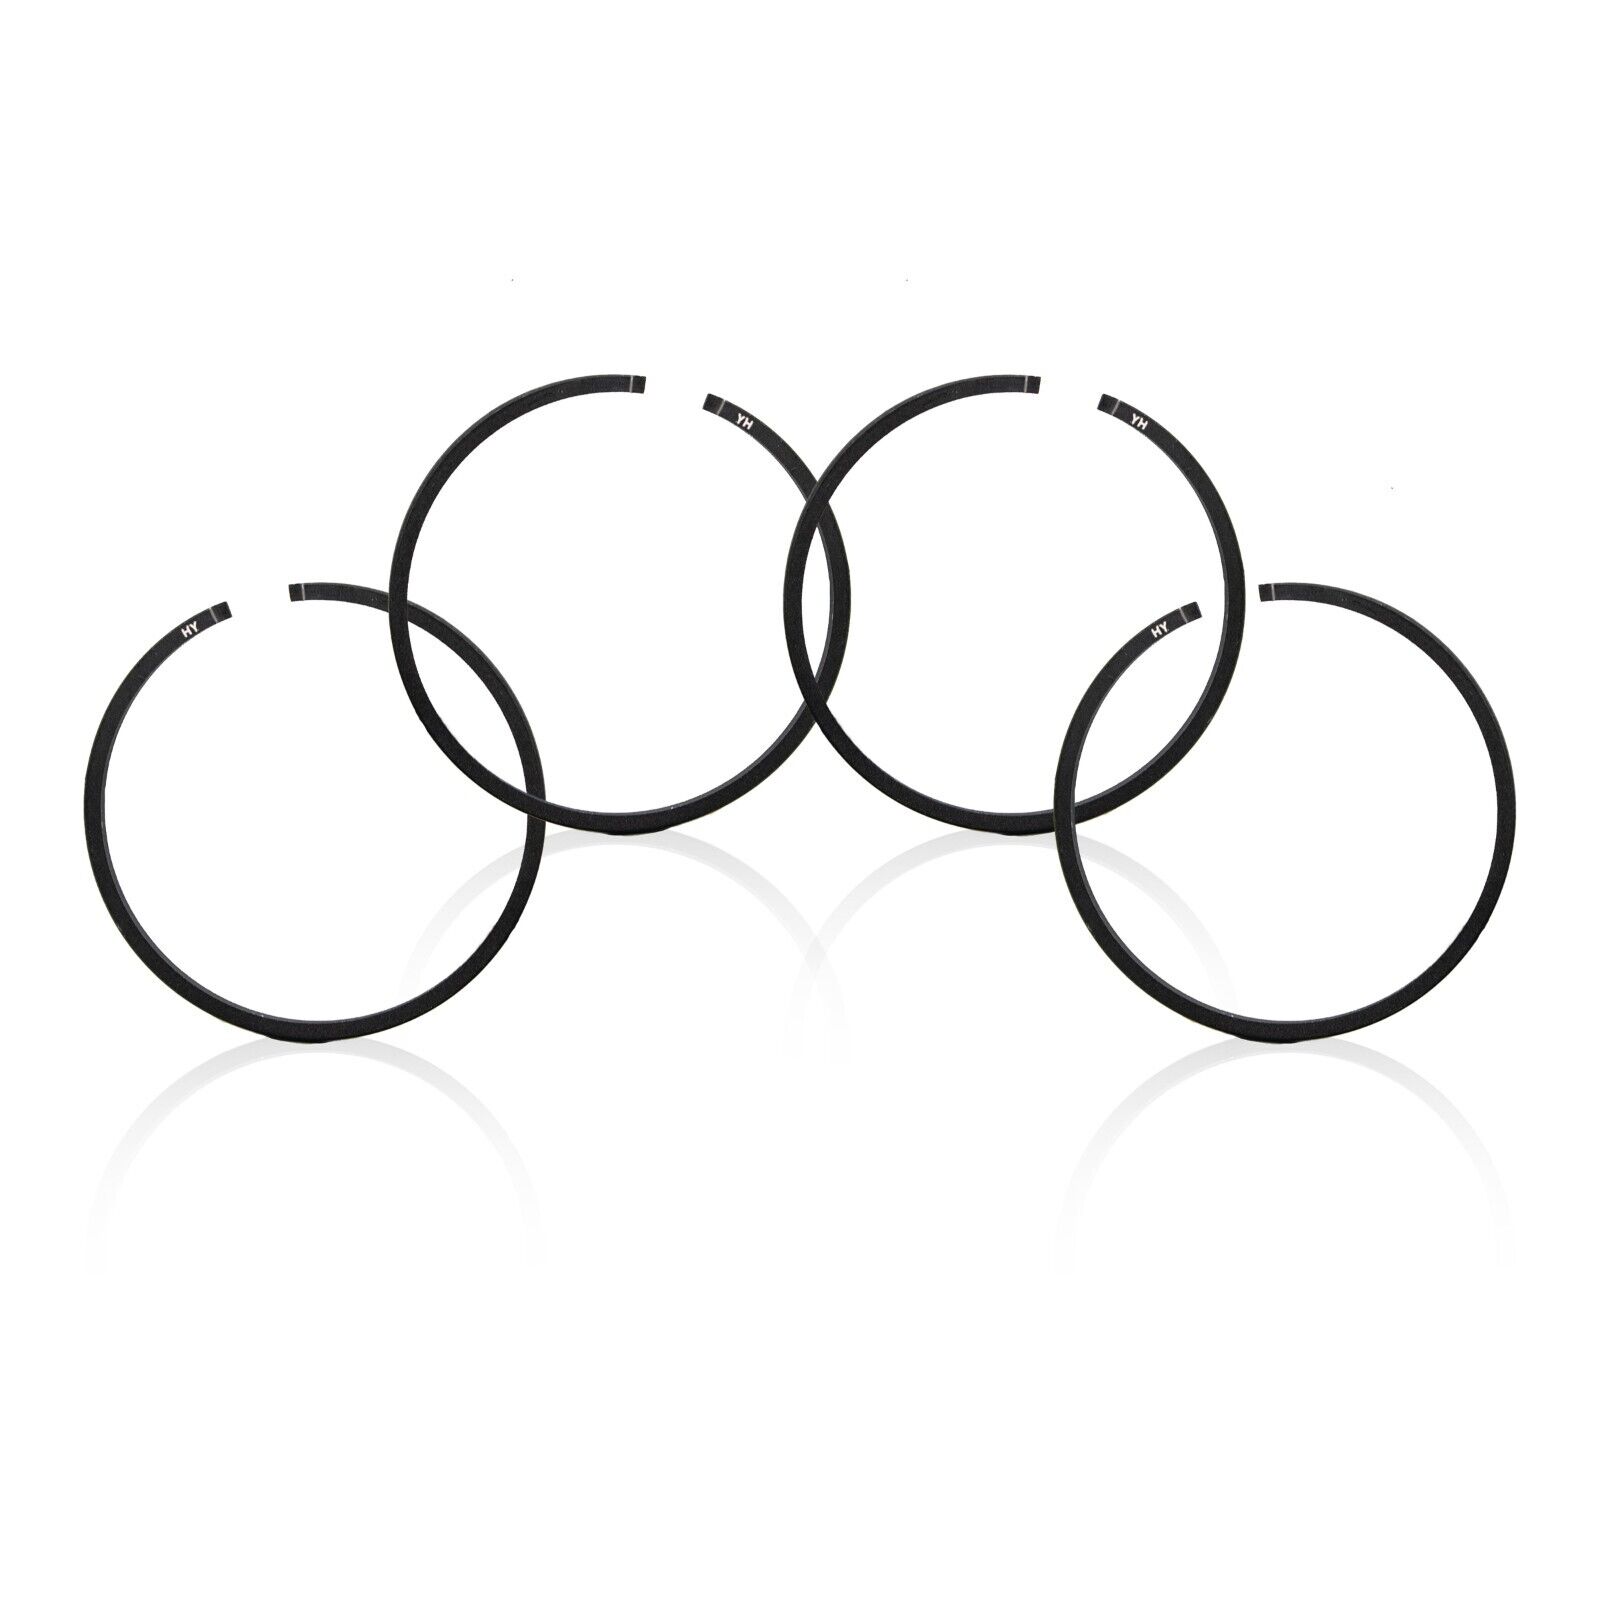 4 PACK 36MM PISTON RINGS FOR 29CC 30CC 30.5CC CY KING RC CAR BAJA GOPED SCOOTER